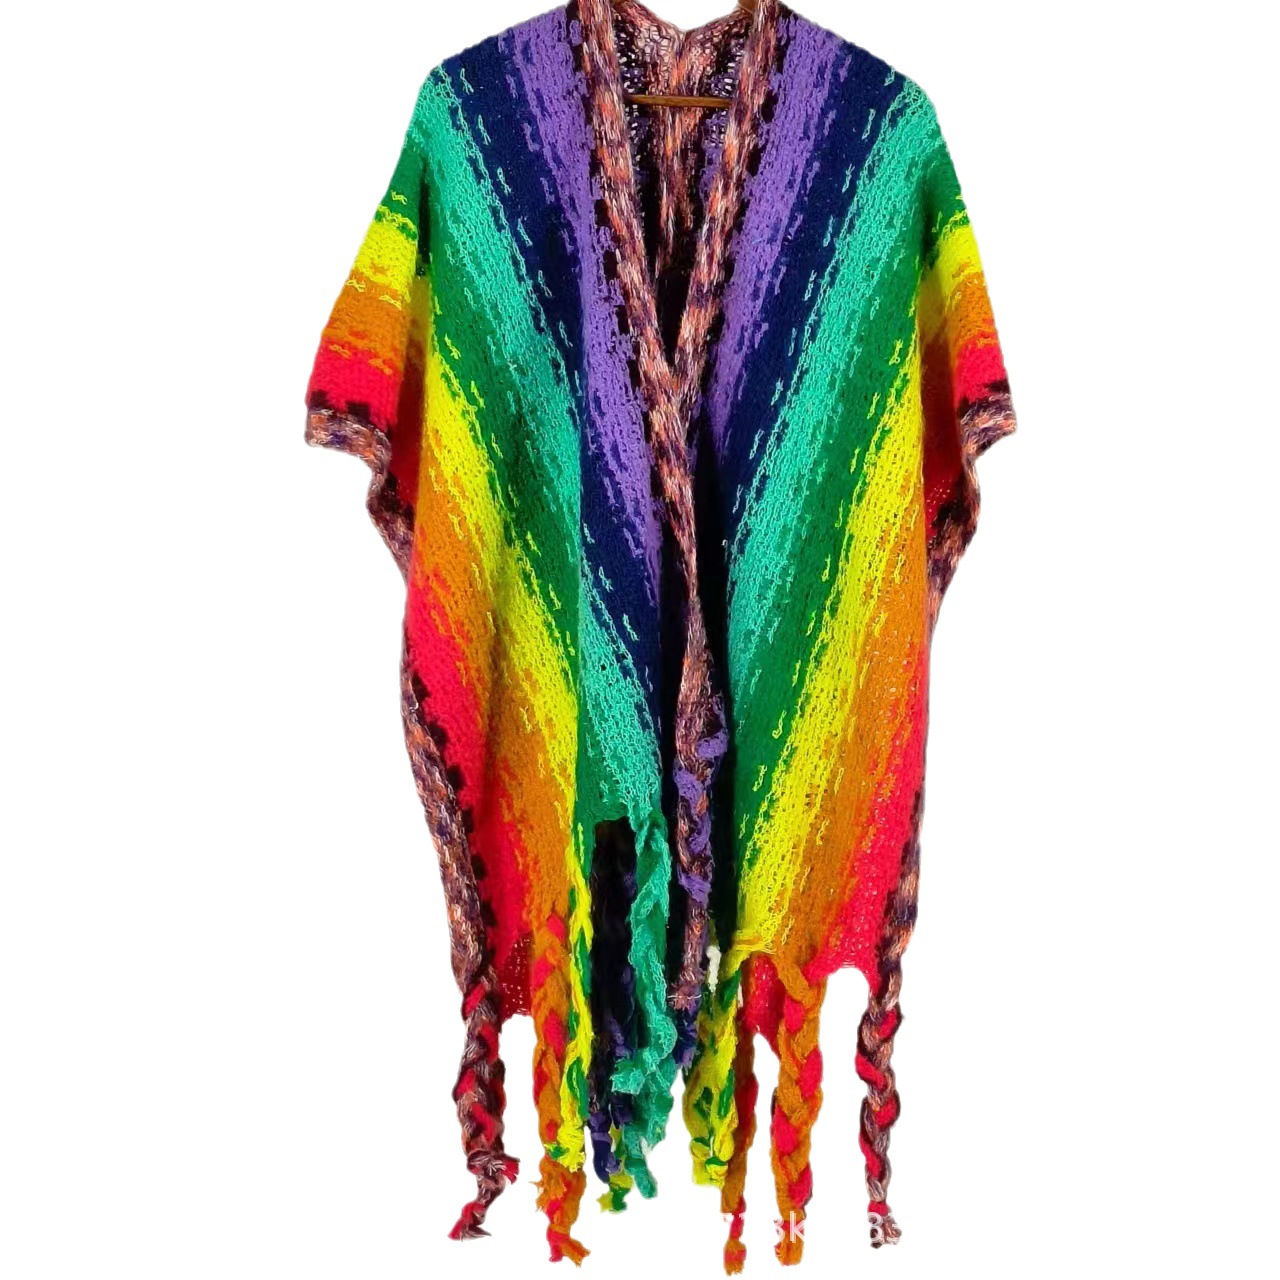 New Ethnic Style Non-Collision Shirt Shawl Cape Lijiang Xinjiang Tibet Northwest Travel Sweater Colorful Cape